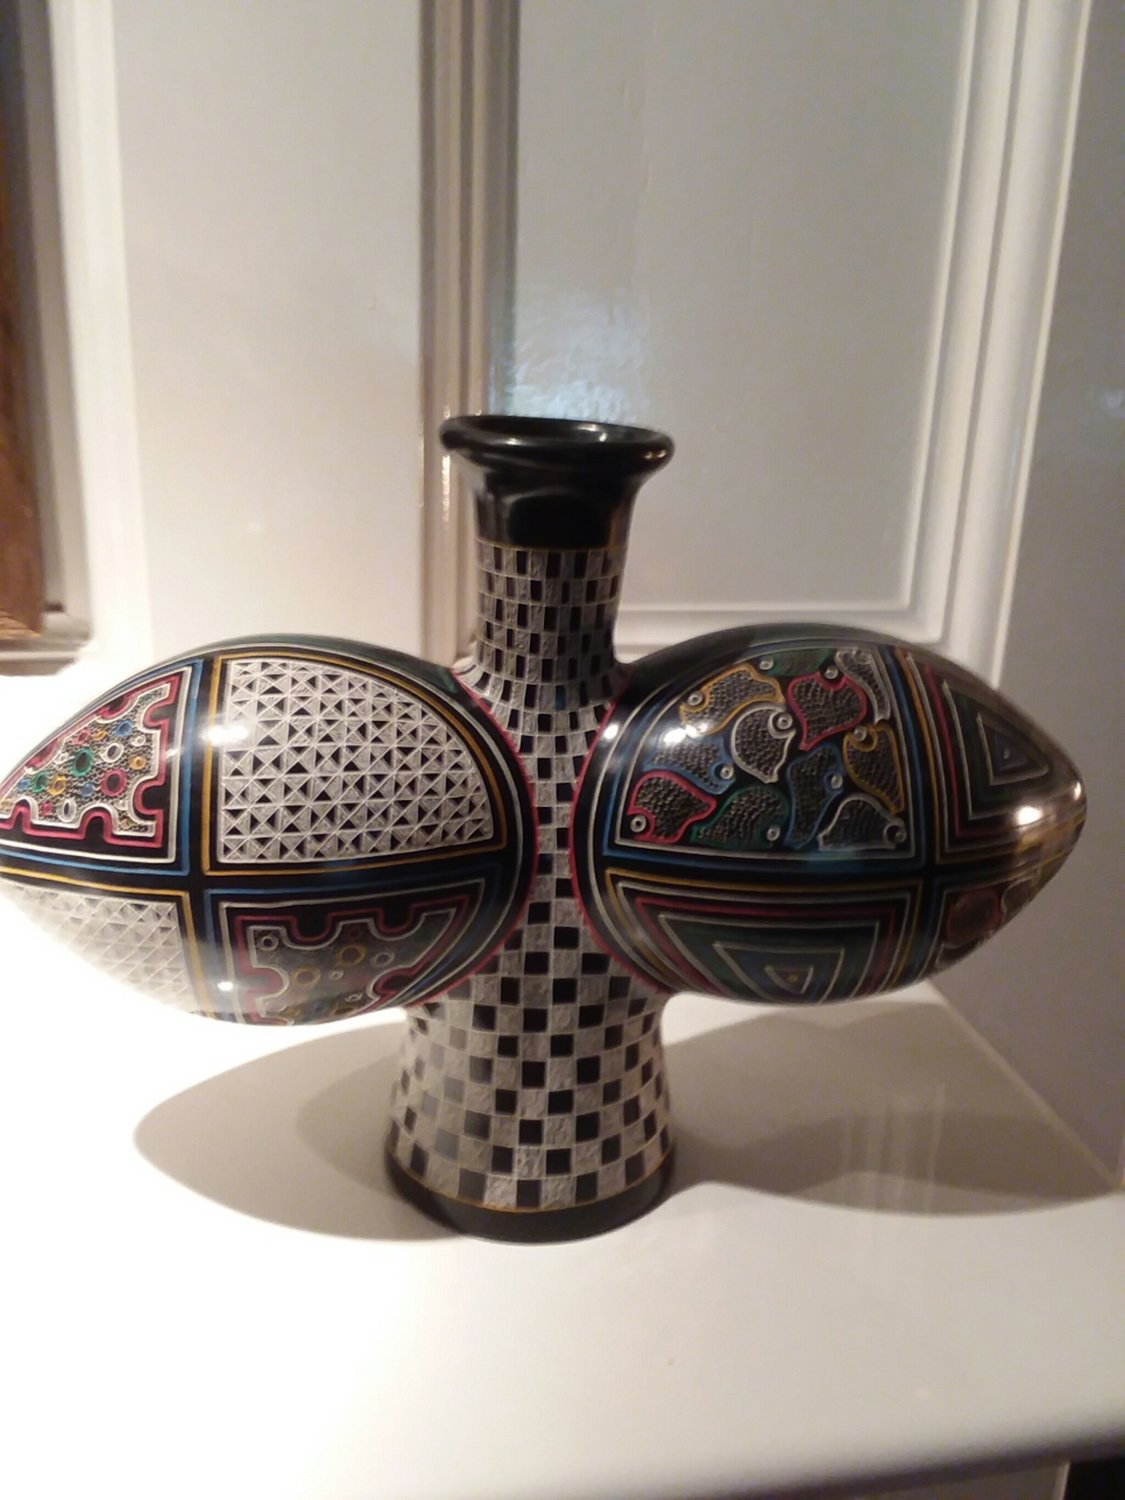 Vase from Portugal